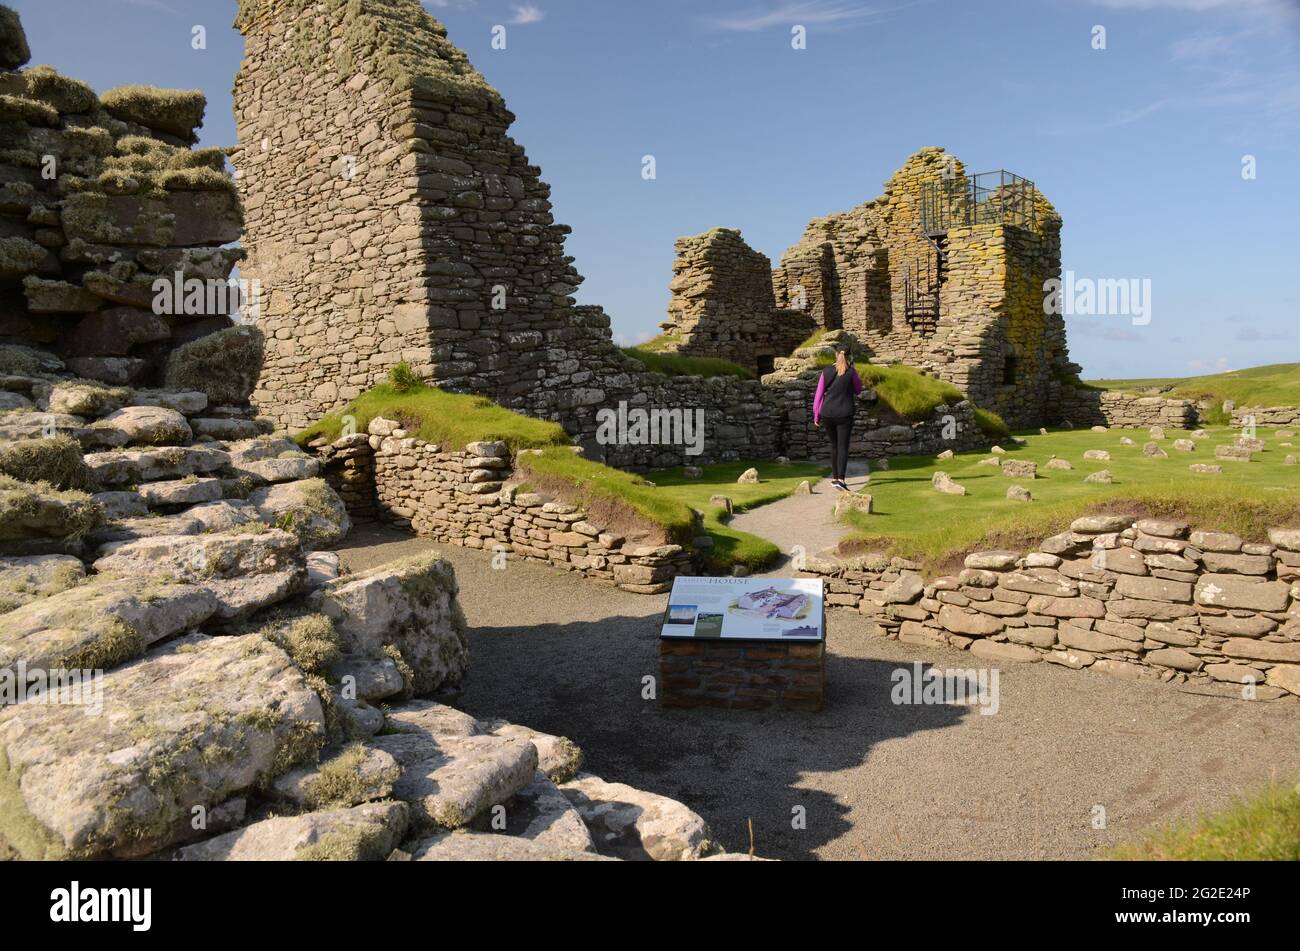 UNITED KINGDOM; SHETLAND ISLANDS, SCOTLAND; RUINS OF THE LAIRDS HOME AT THE JARLSHOF PREHISTORIC AND NORSE SETTLEMENT; WITH RUINS OF ANCIENT UNDERGROU Stock Photo